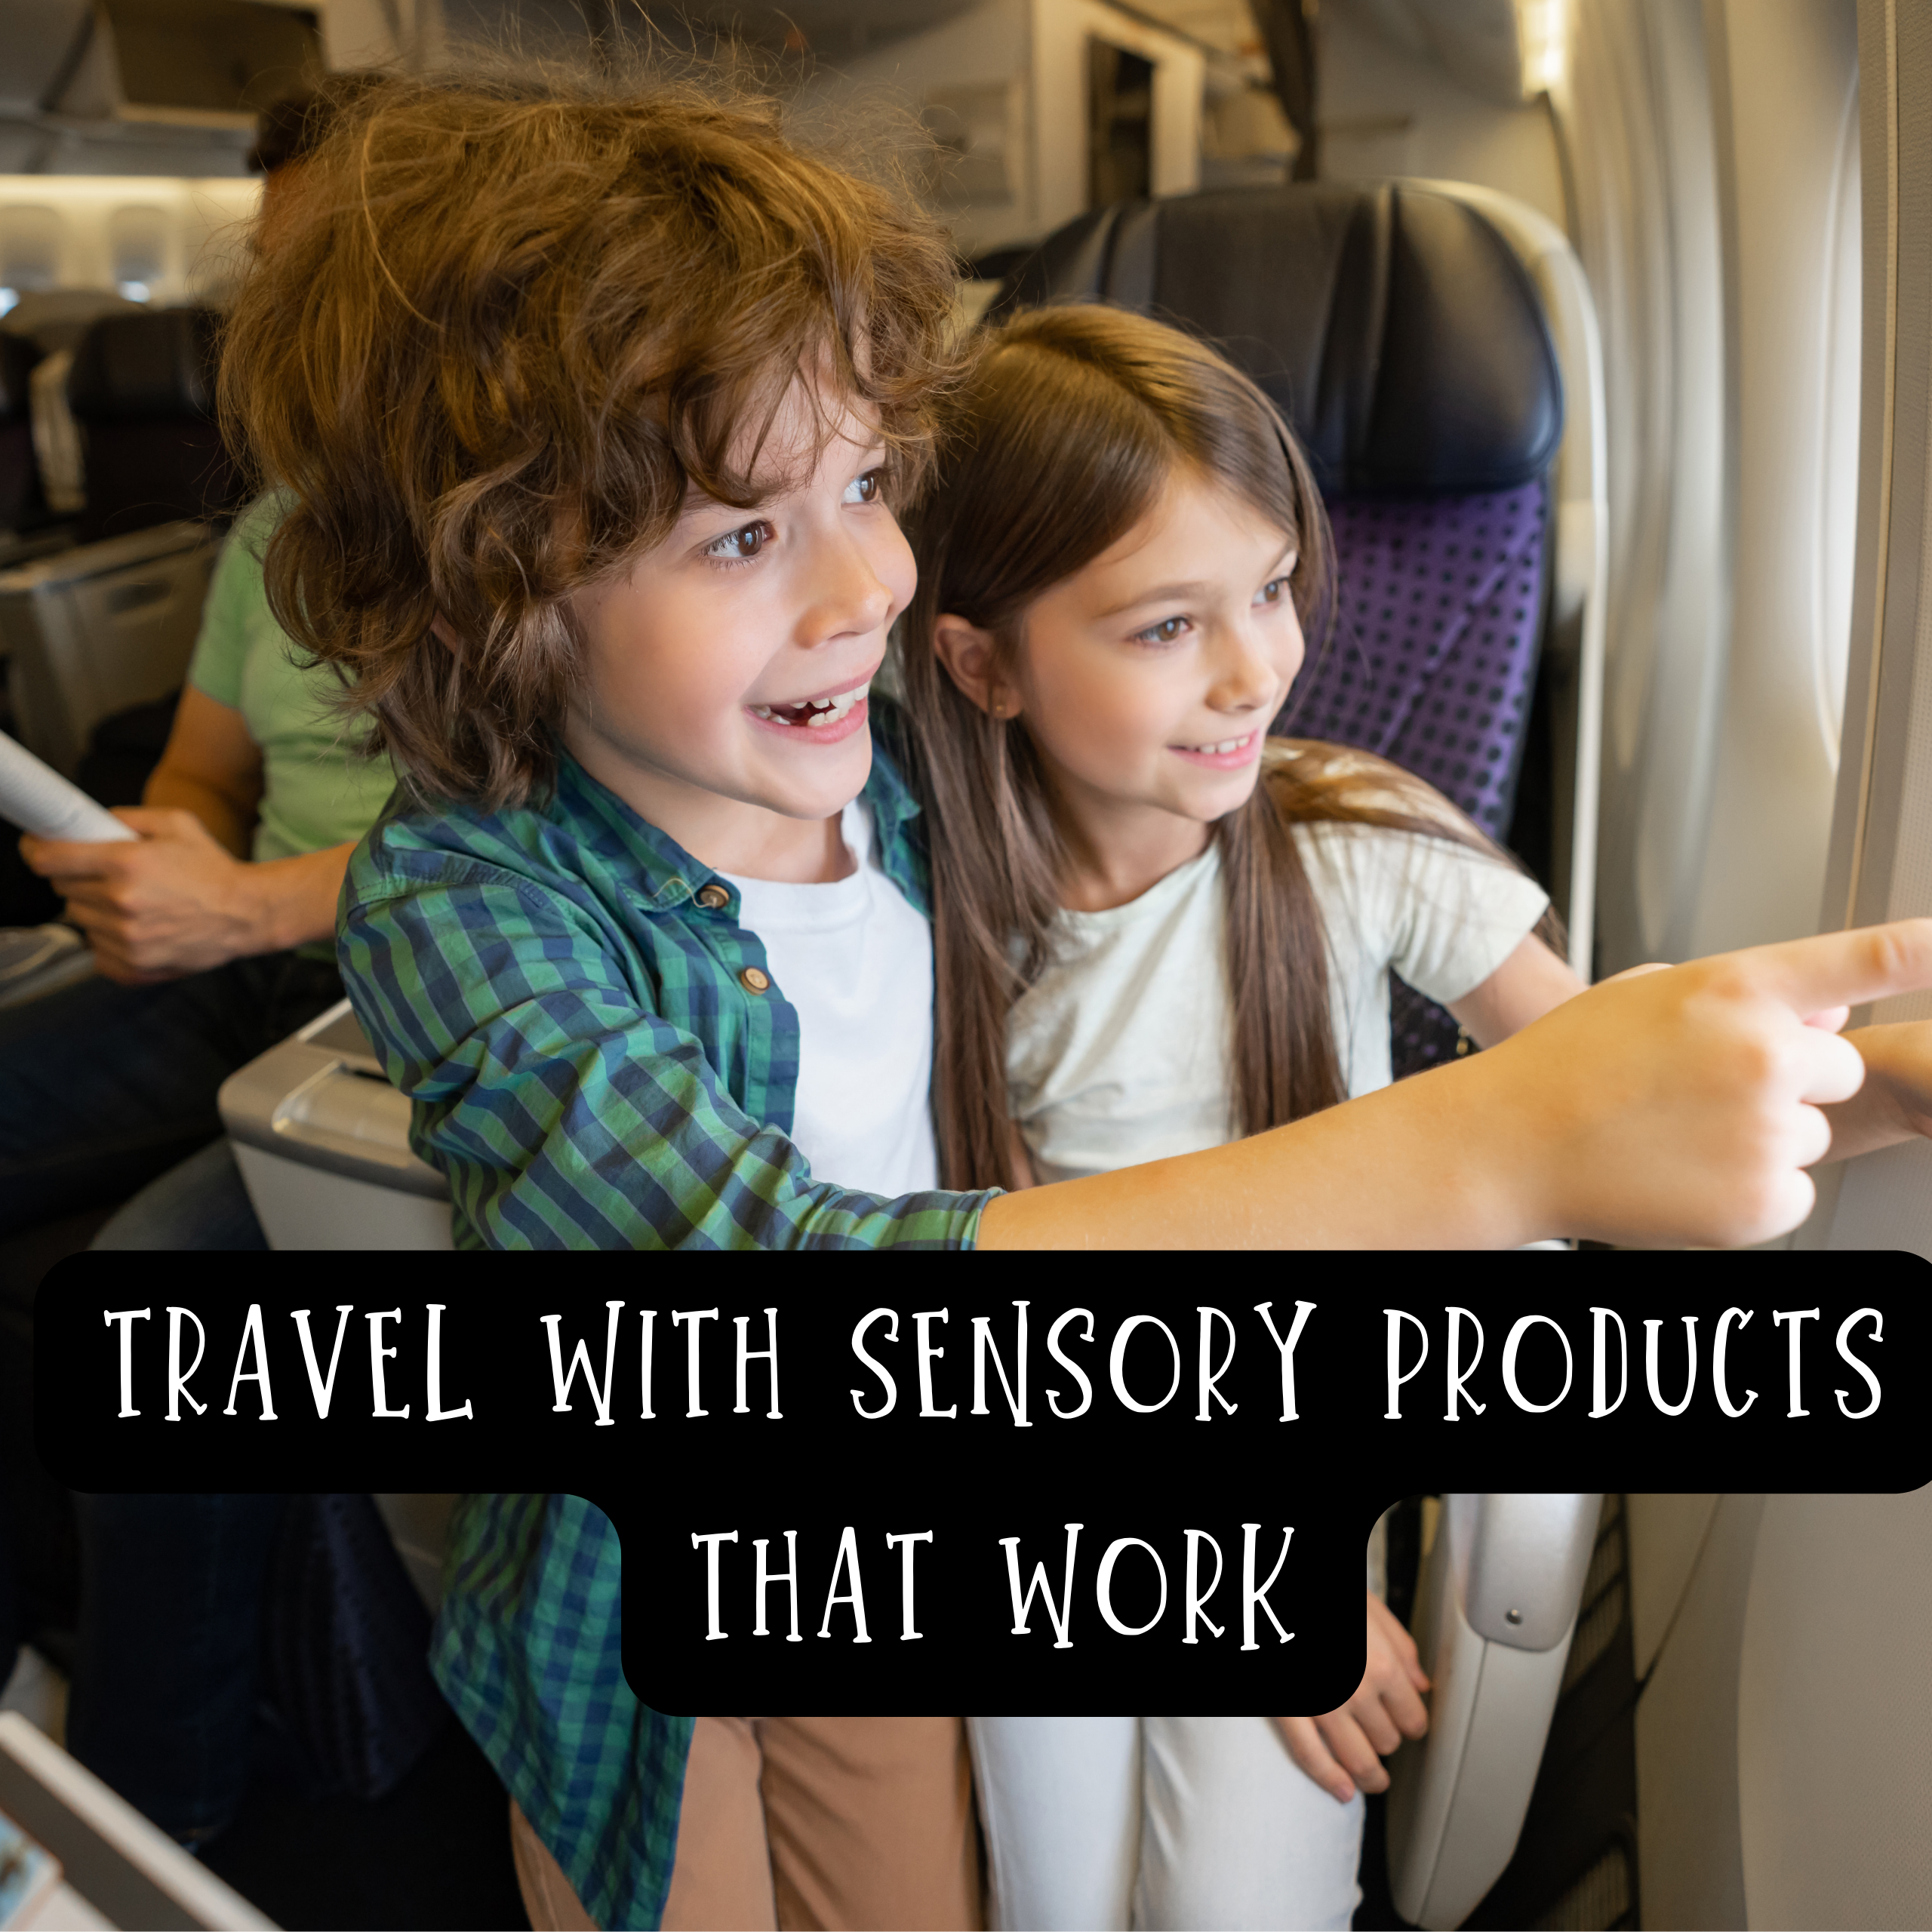 Autism & ADHD sensory products for traveling